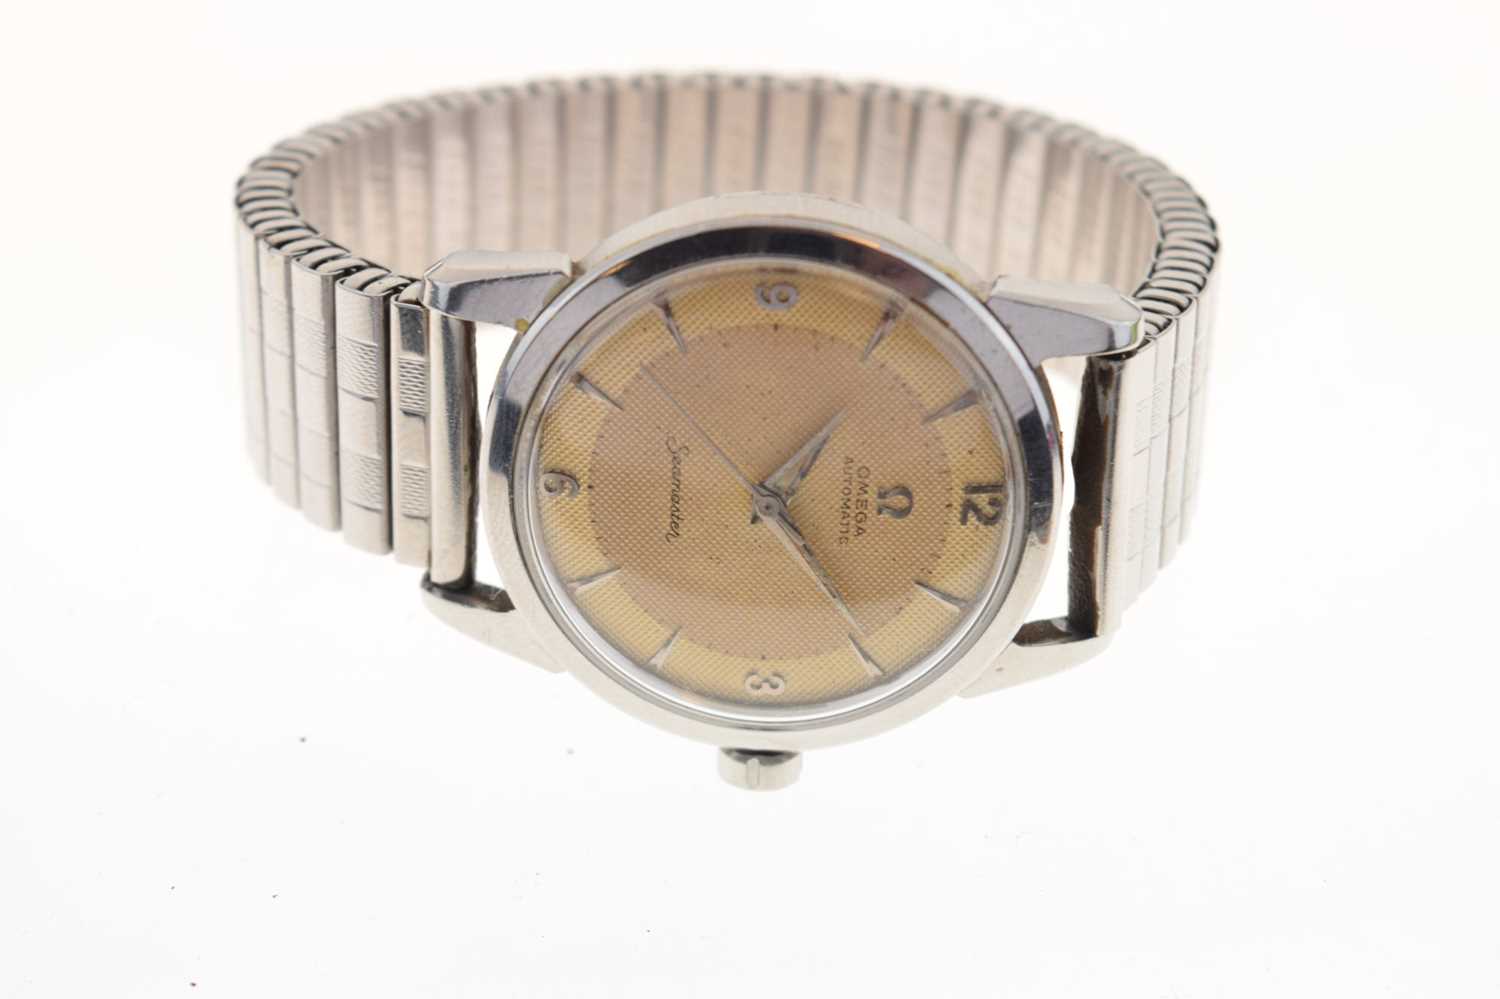 Omega - Gentleman's Seamaster Automatic stainless steel wristwatch - Image 3 of 8